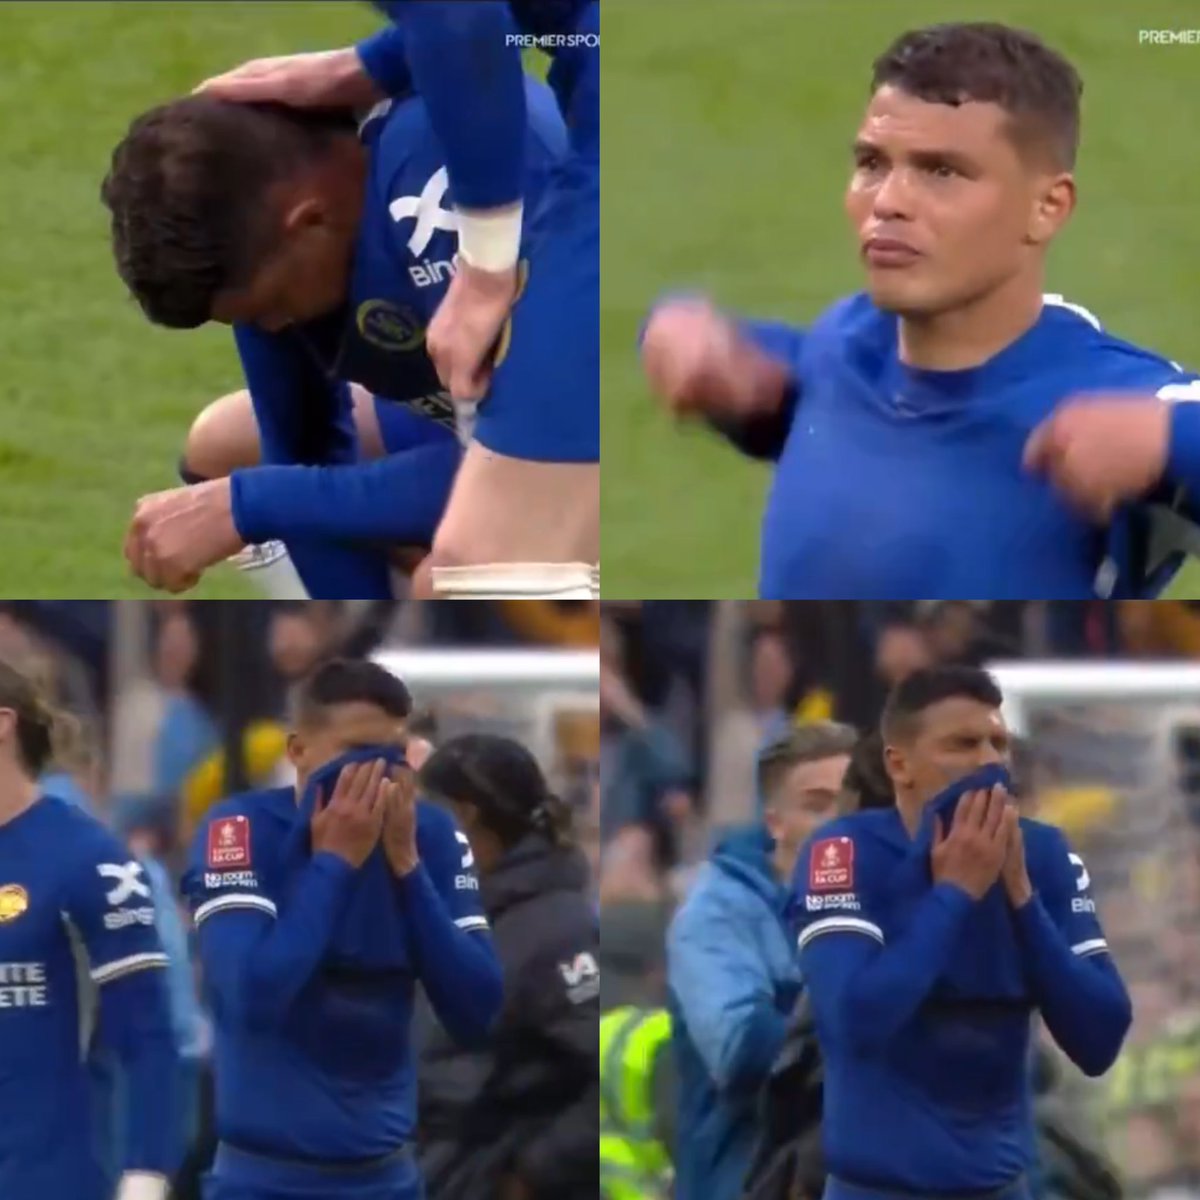 I love how much Thiago Silva cares. He's given absolutely everything for the shirt since he arrived. Whatever his future holds at Chelsea, he will go down as a legend and will always be welcomed back. Simply the best 💙👏